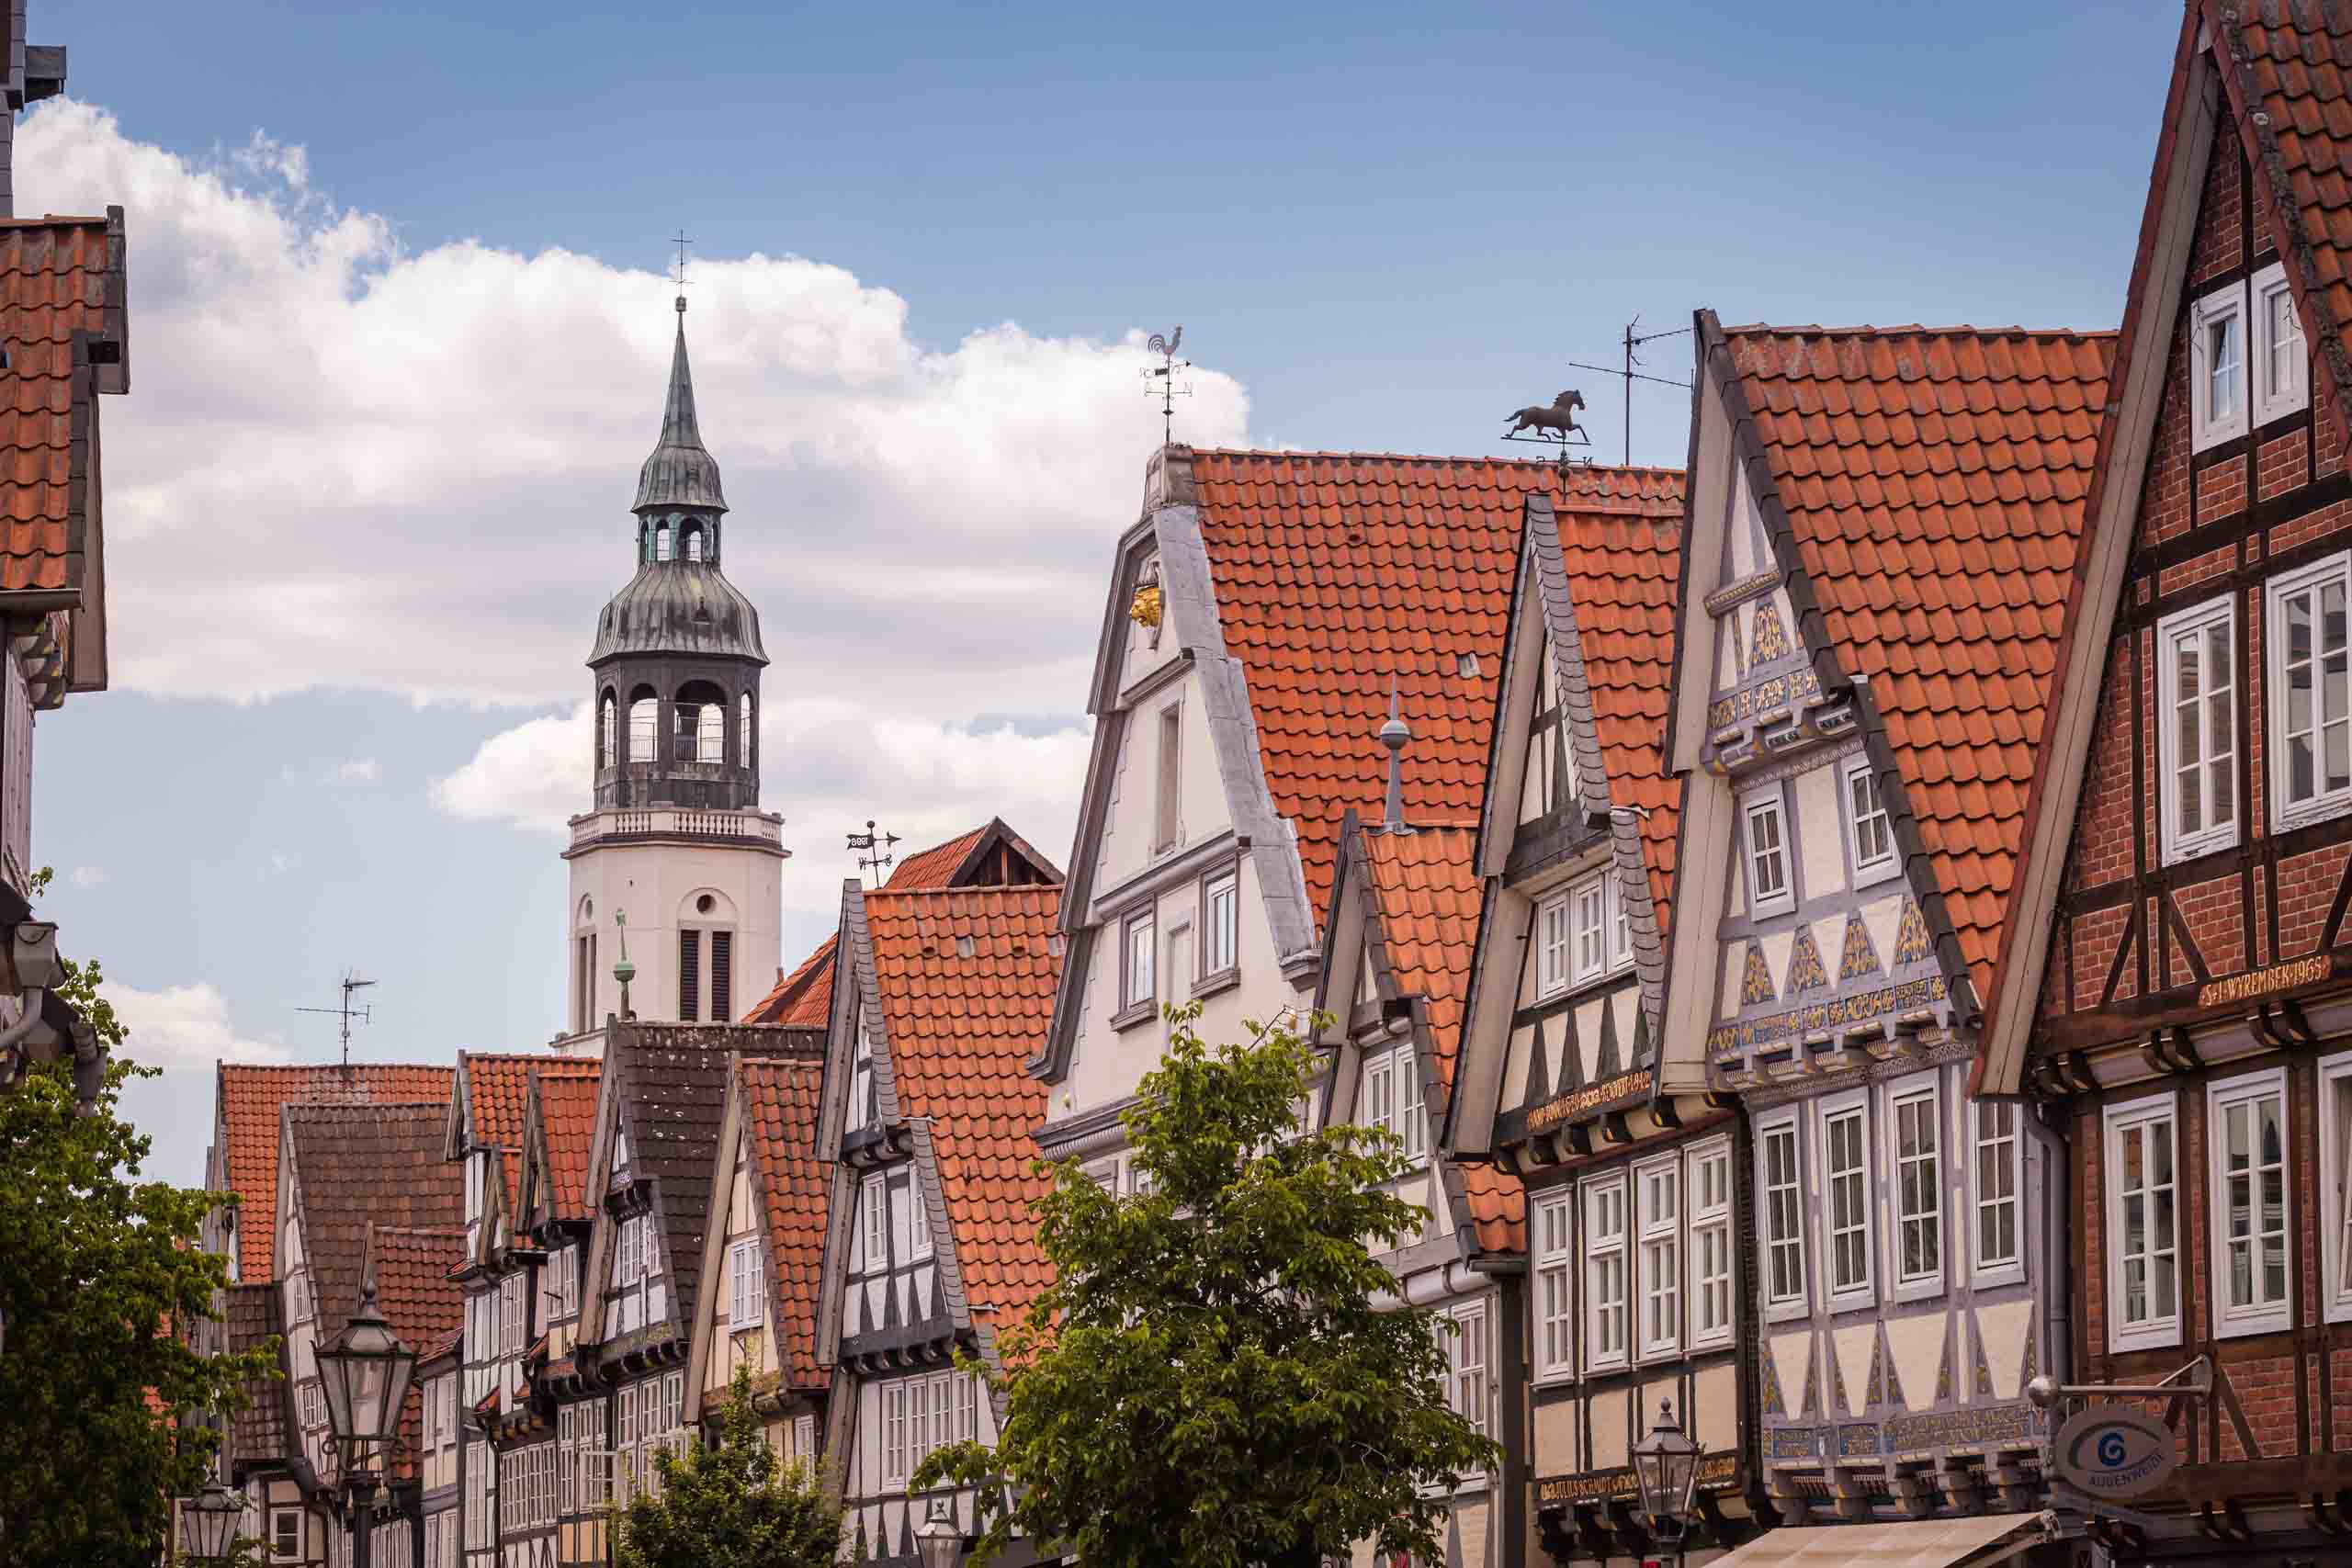 Celle is a real half-timbered town